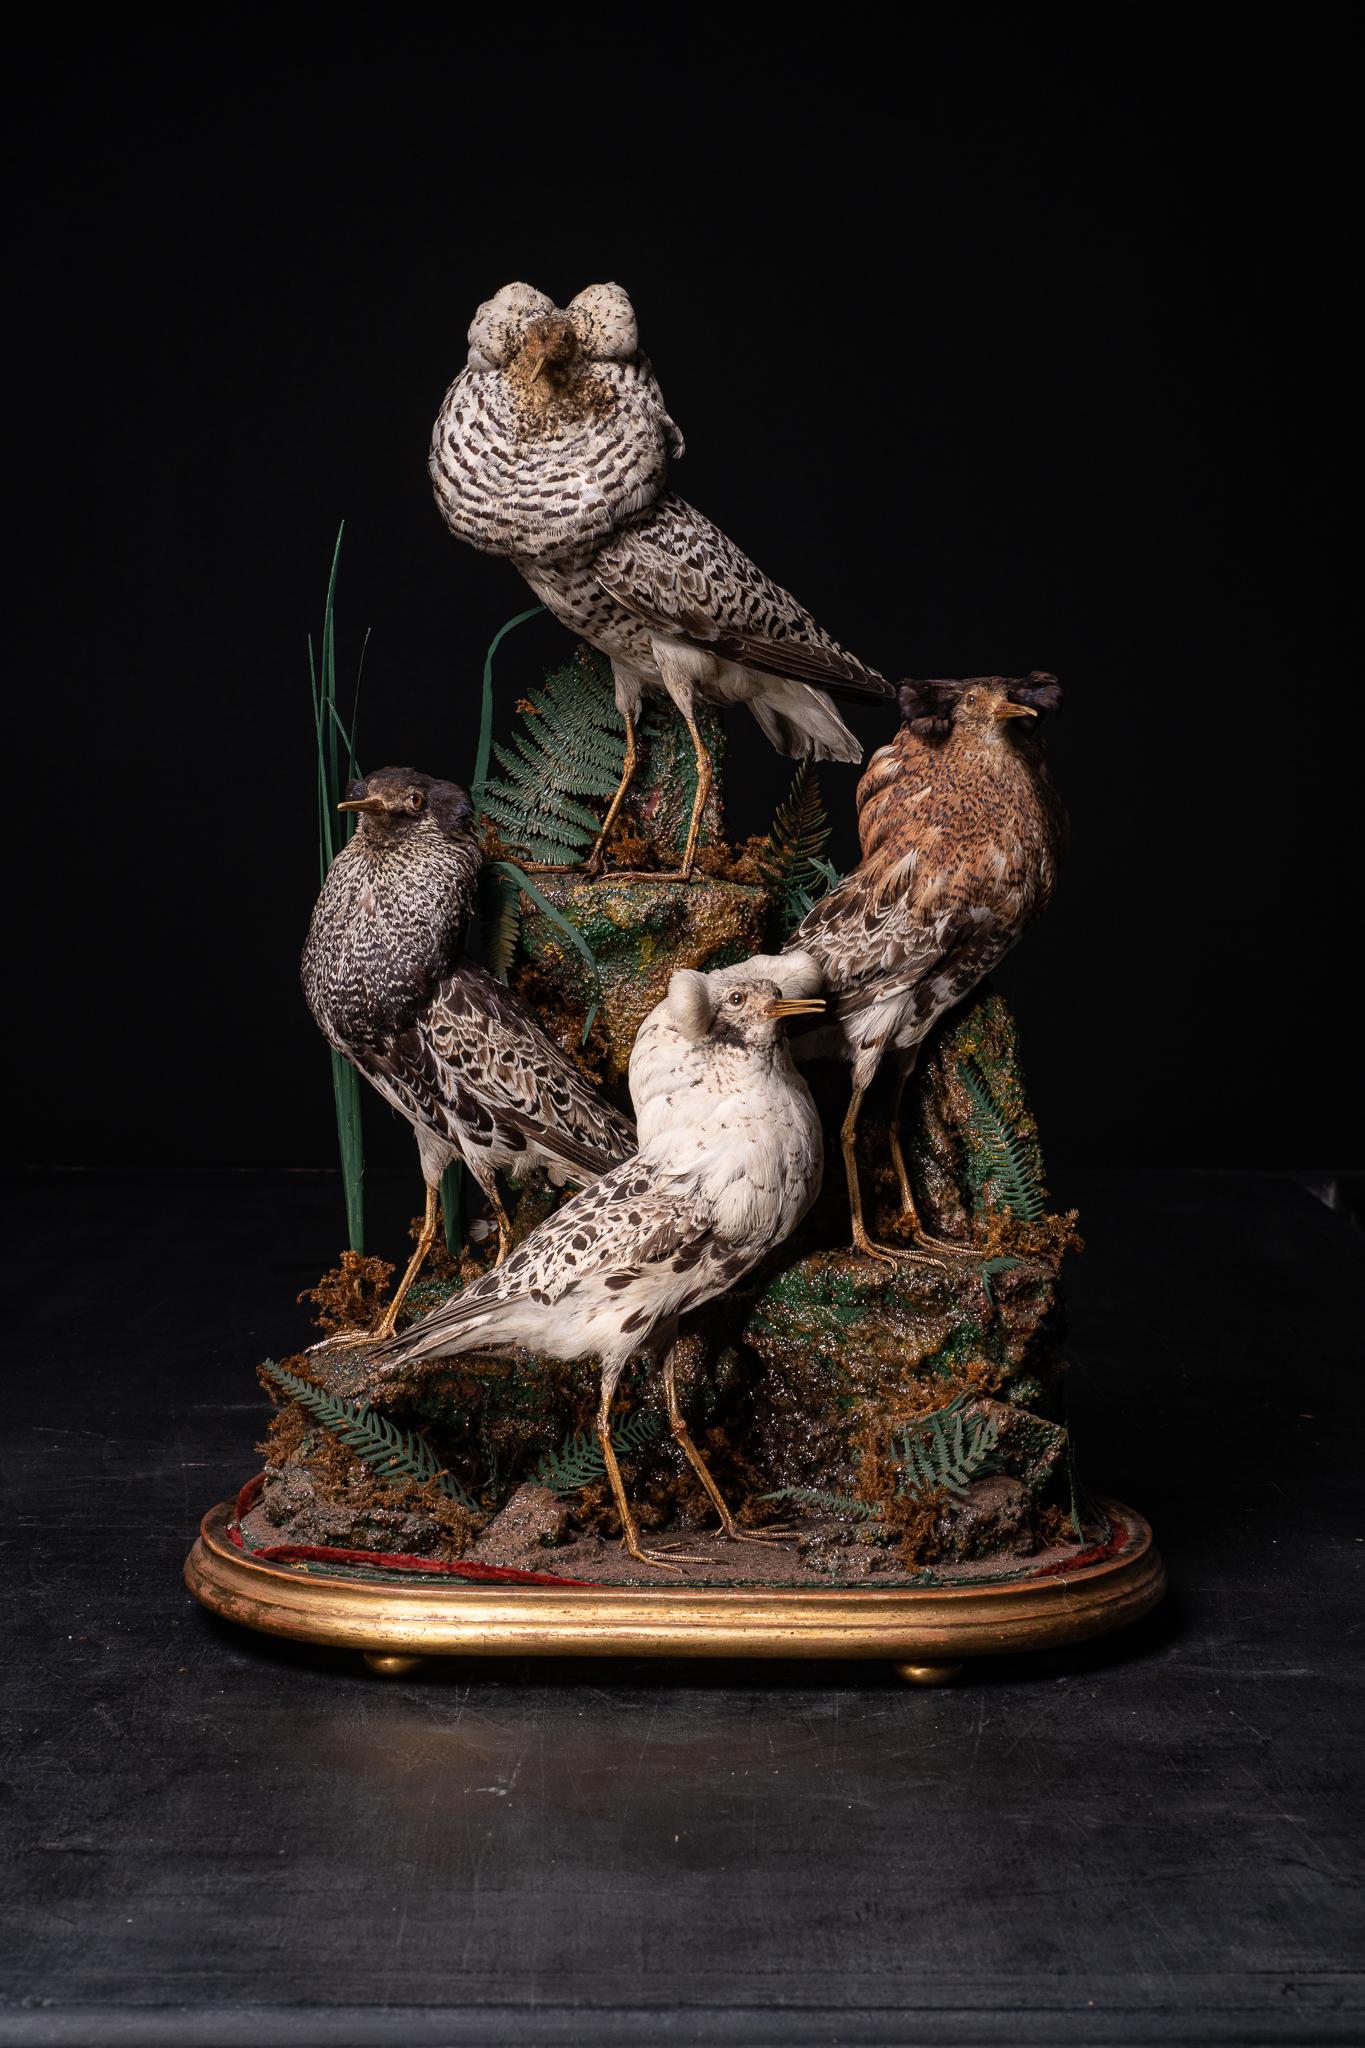 Hand-Carved Antique 19th C Victorian Diorama of 4 Ruff's 'Philomachus Pugnax' by Henri Ward For Sale